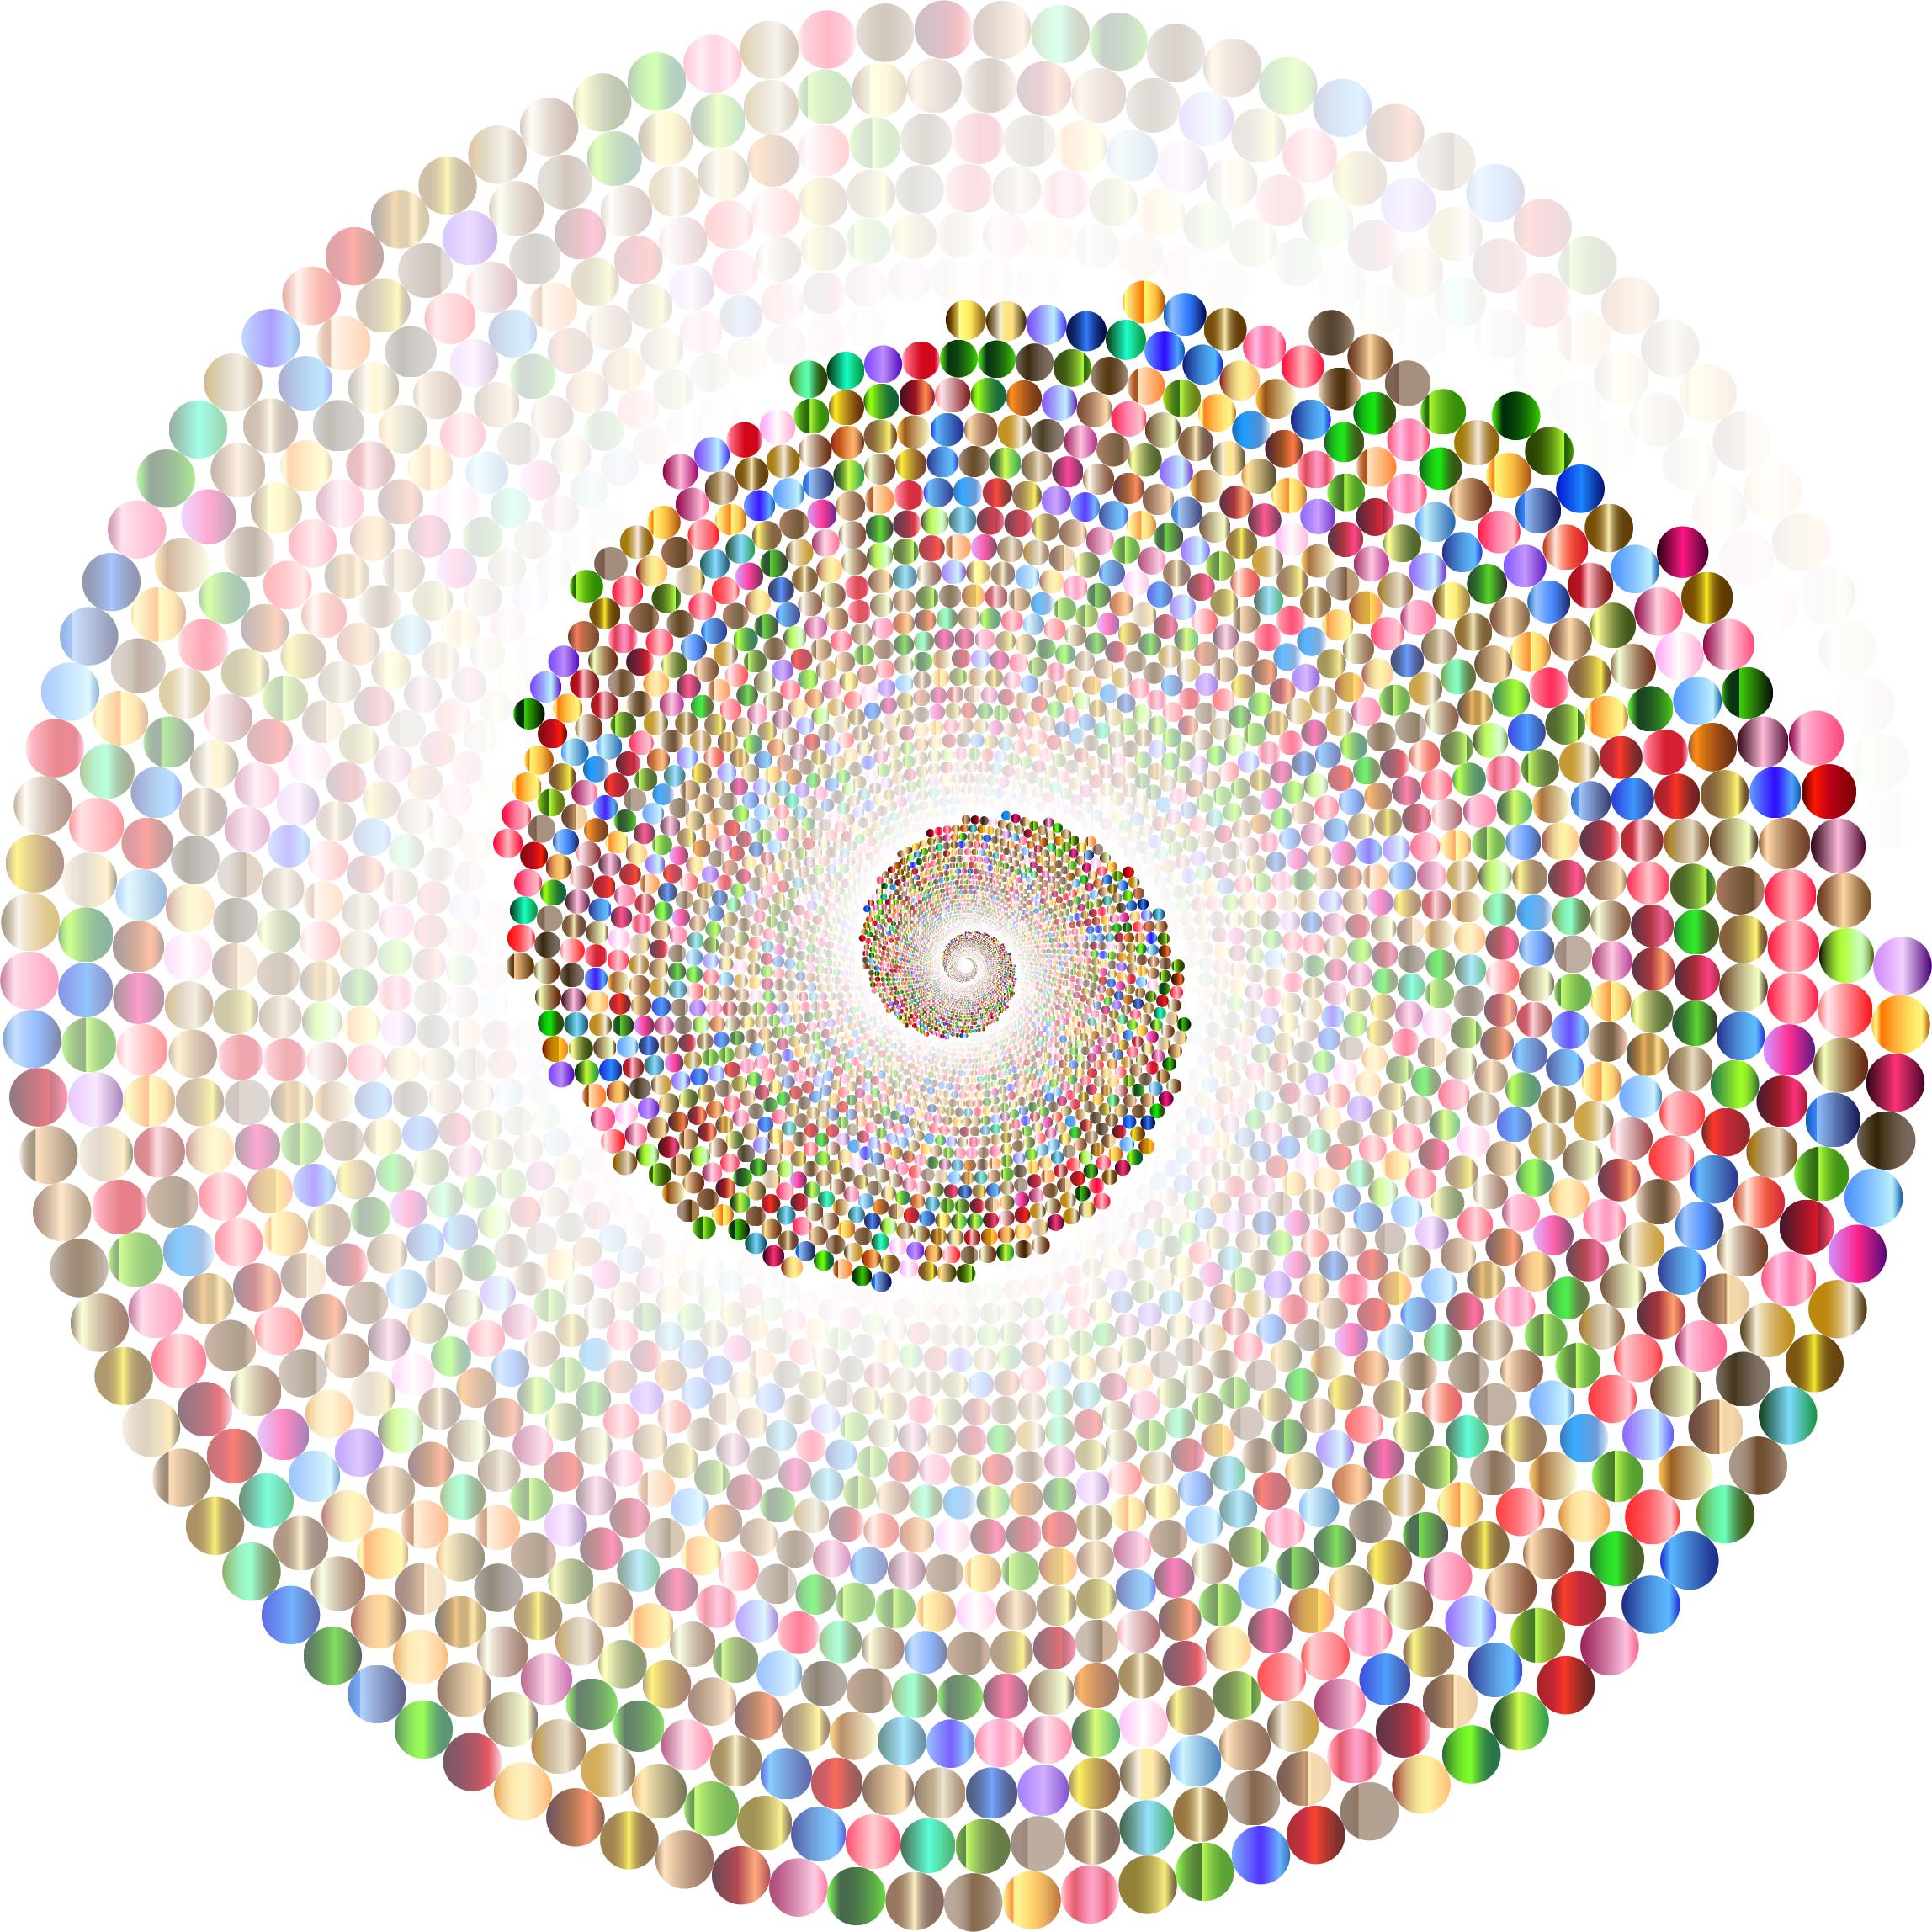 Colorful Swirling Circles Vortex icons